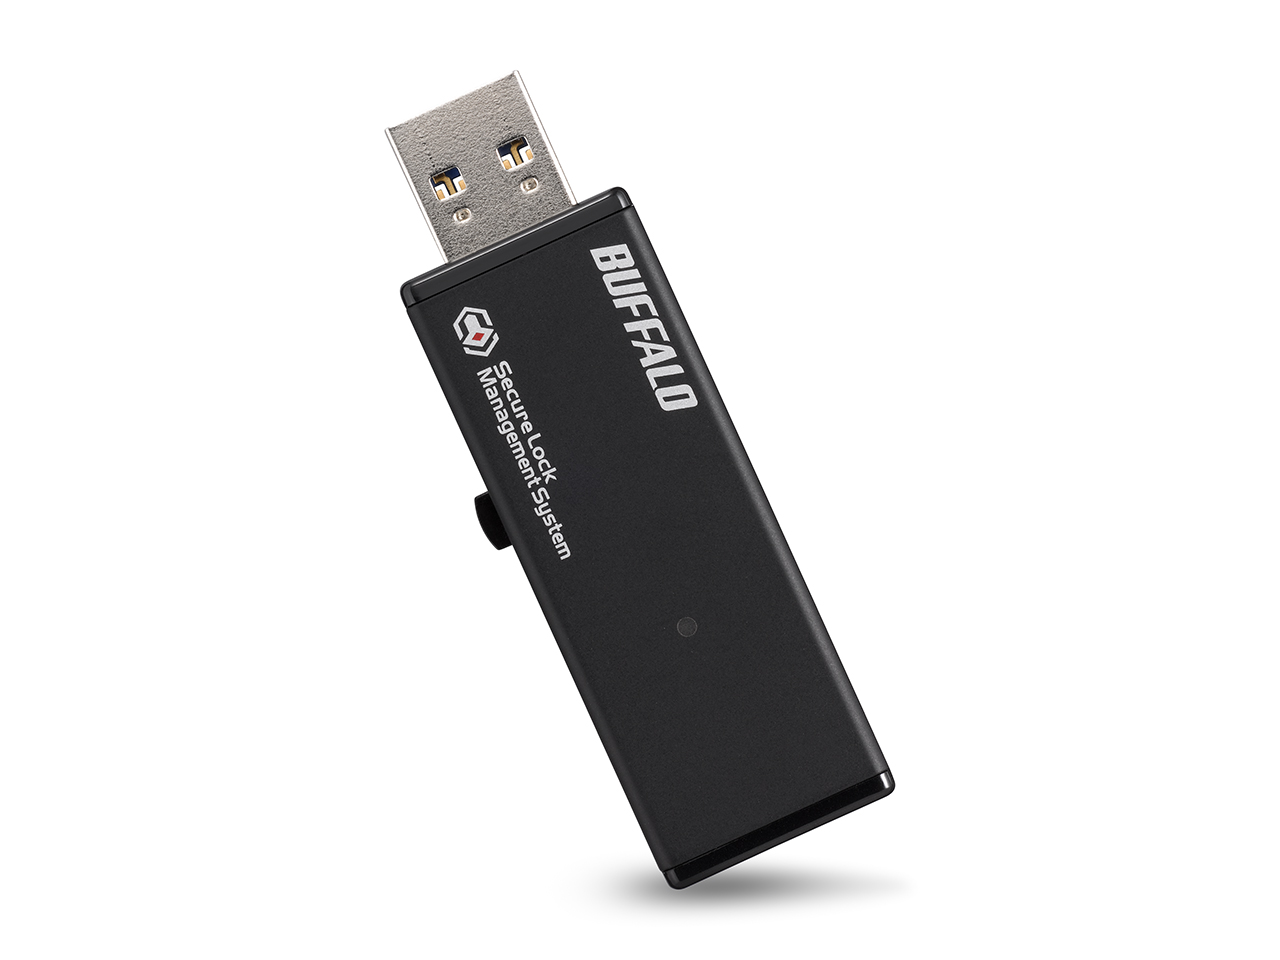 Security USB forbusiness - securityusbmemory - ruf3-hs GLOBAL